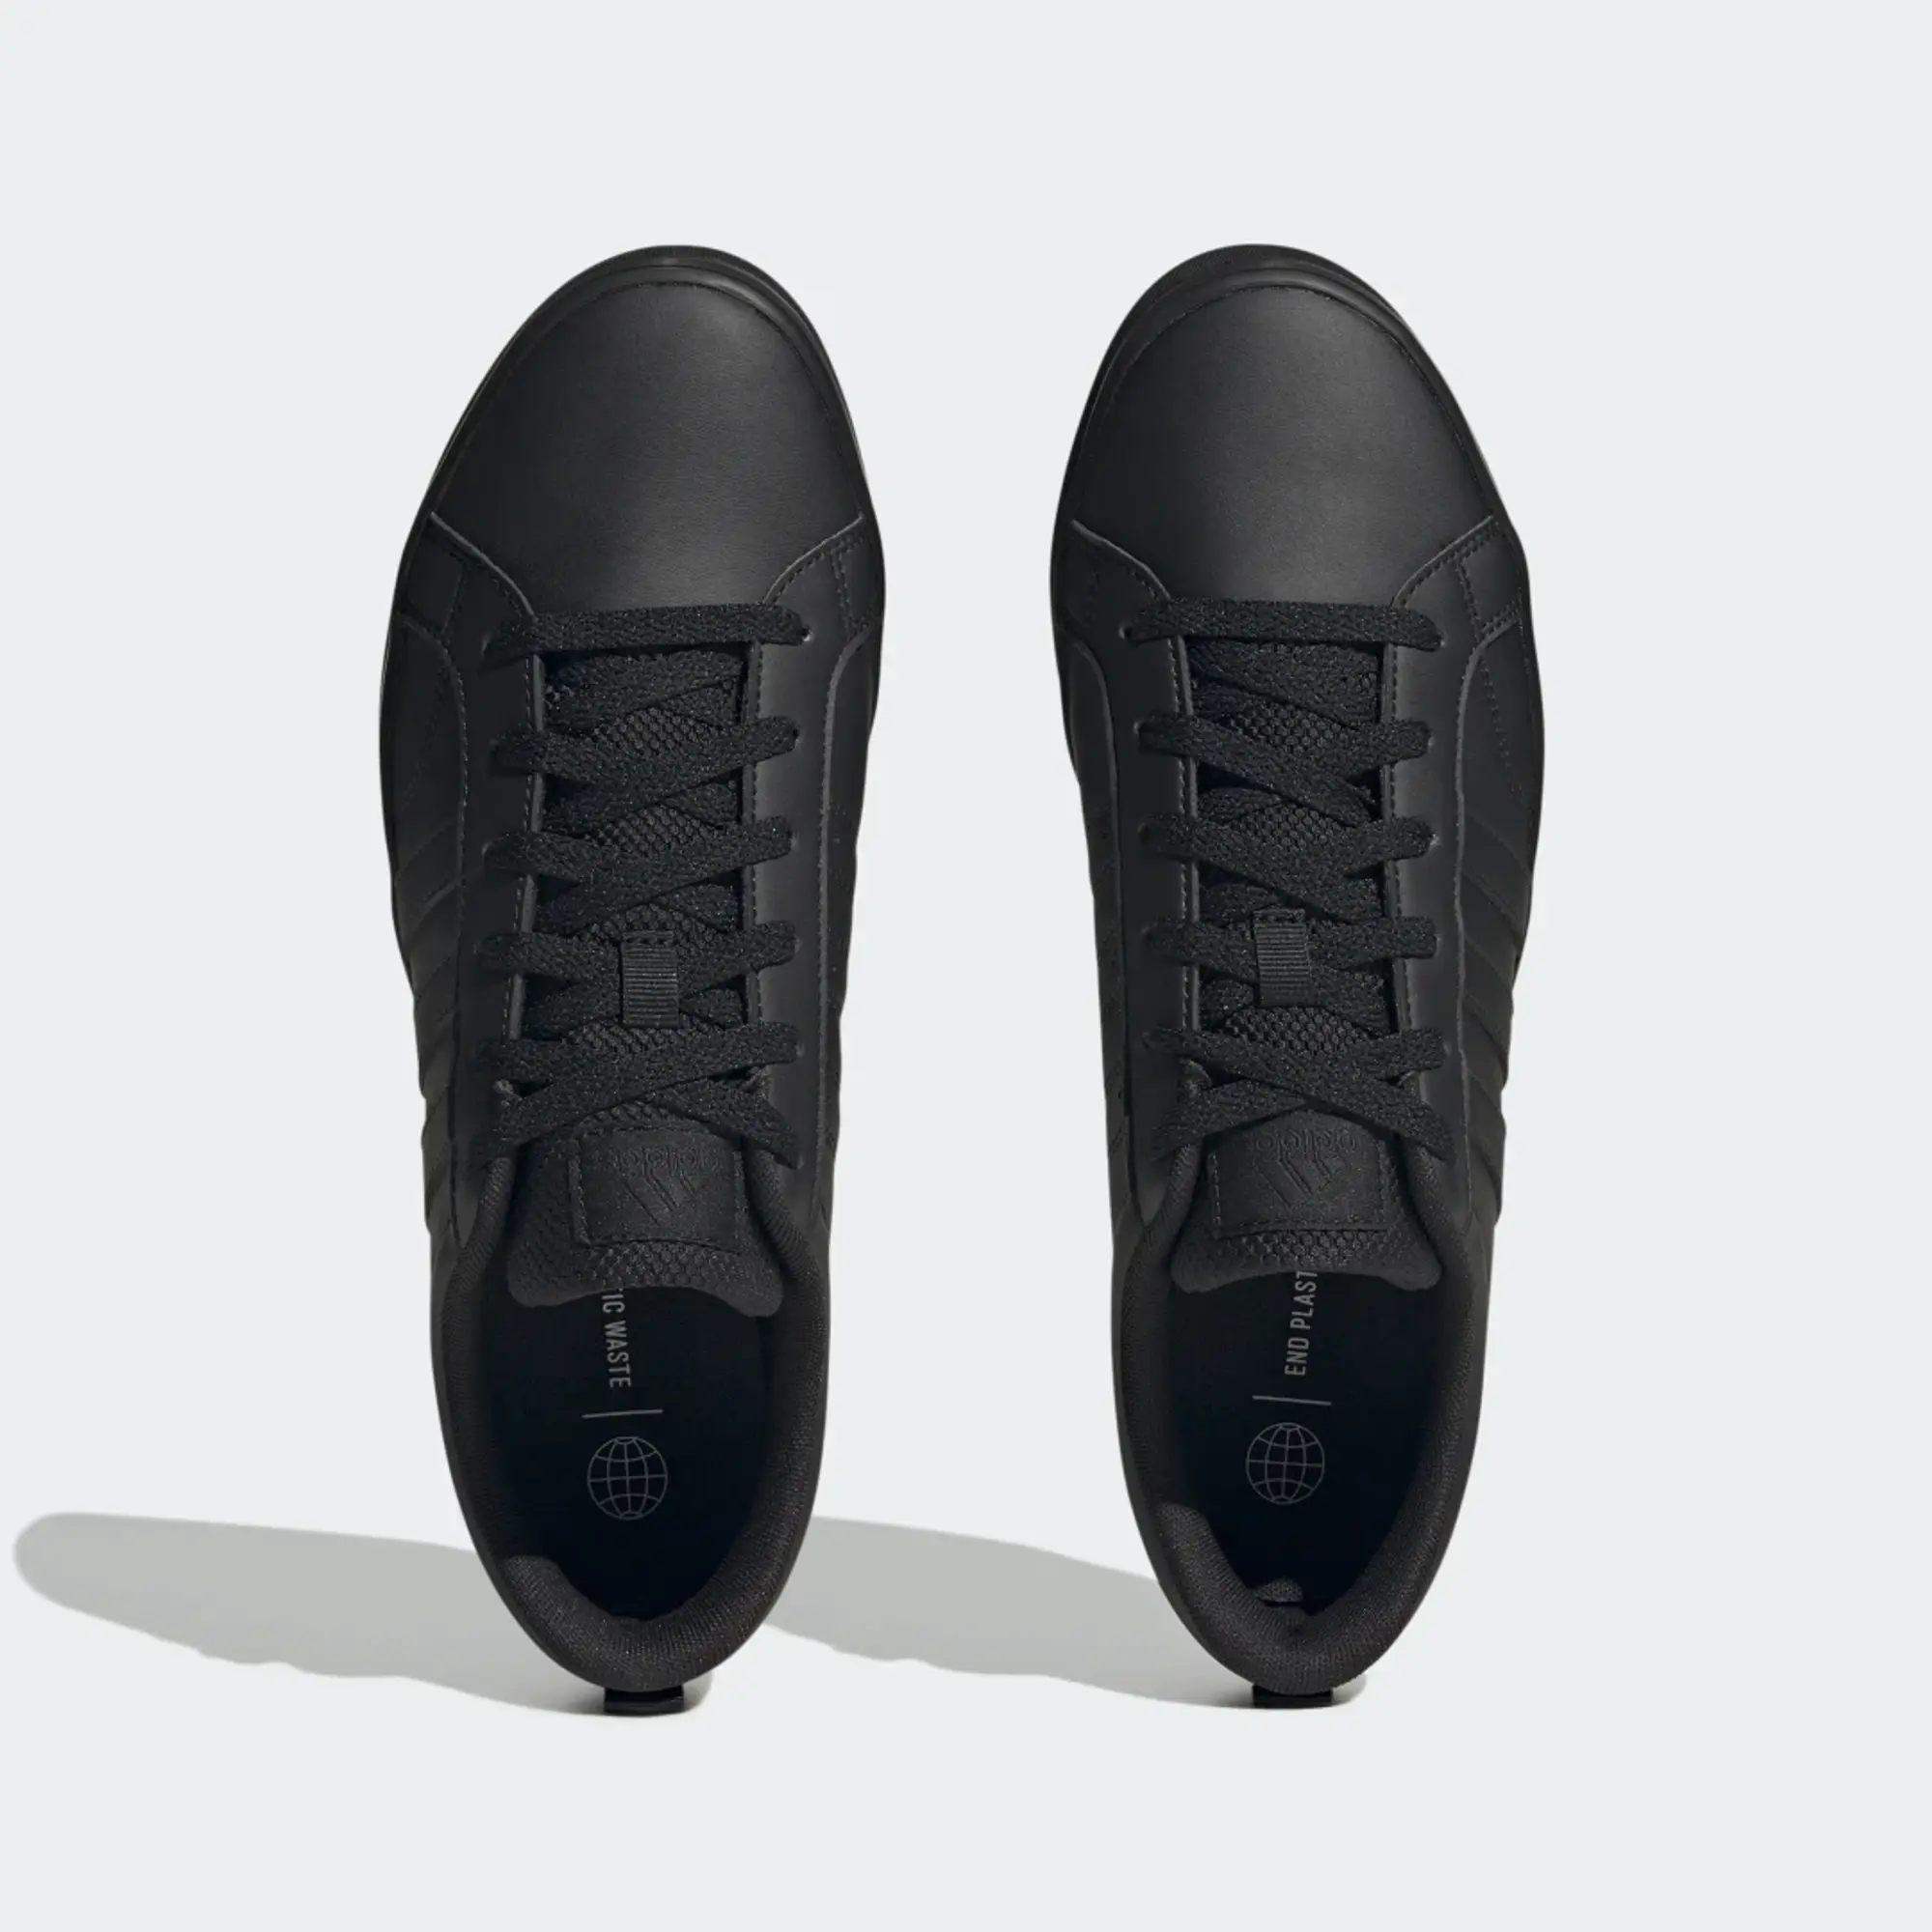 Adidas Vs Pace 2.0 Trainers  - Black